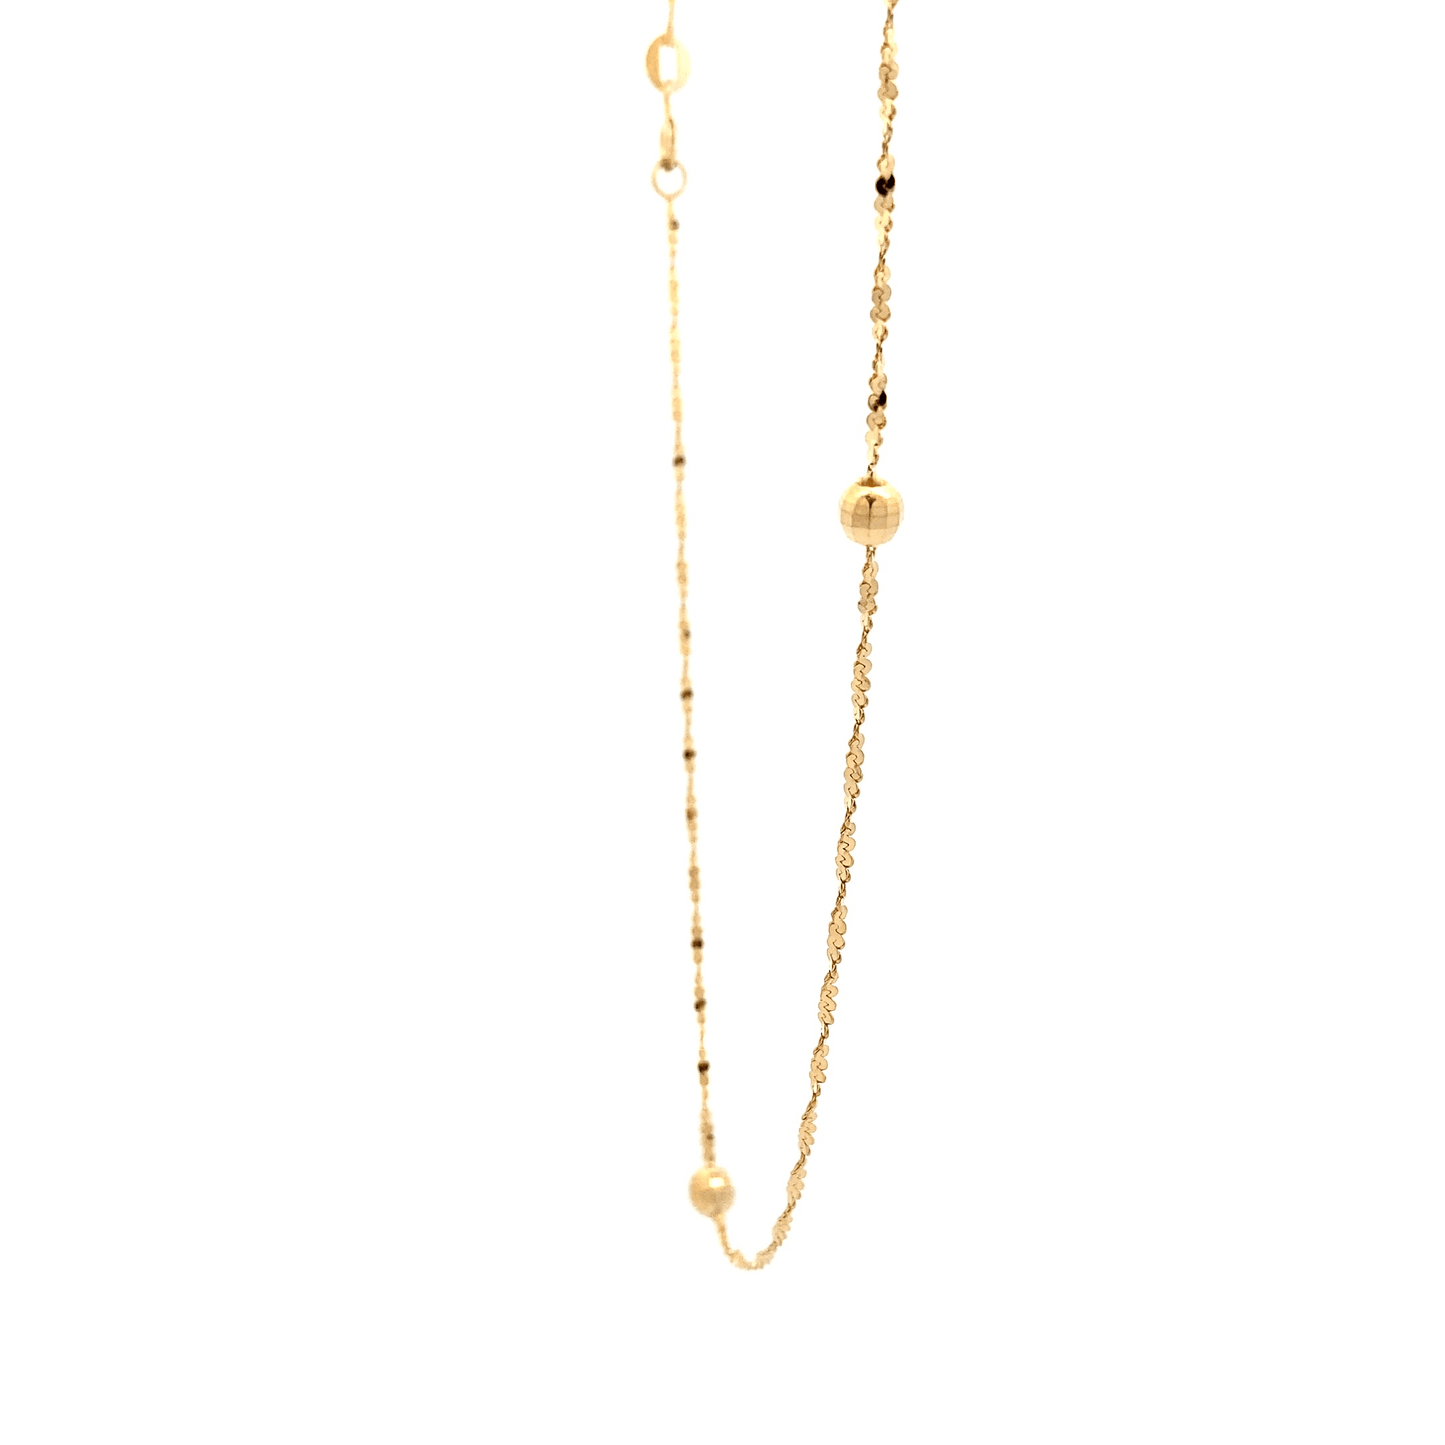 14K Yellow Gold 32" Beaded Twisted Serpentine Chain - ipawnishop.com